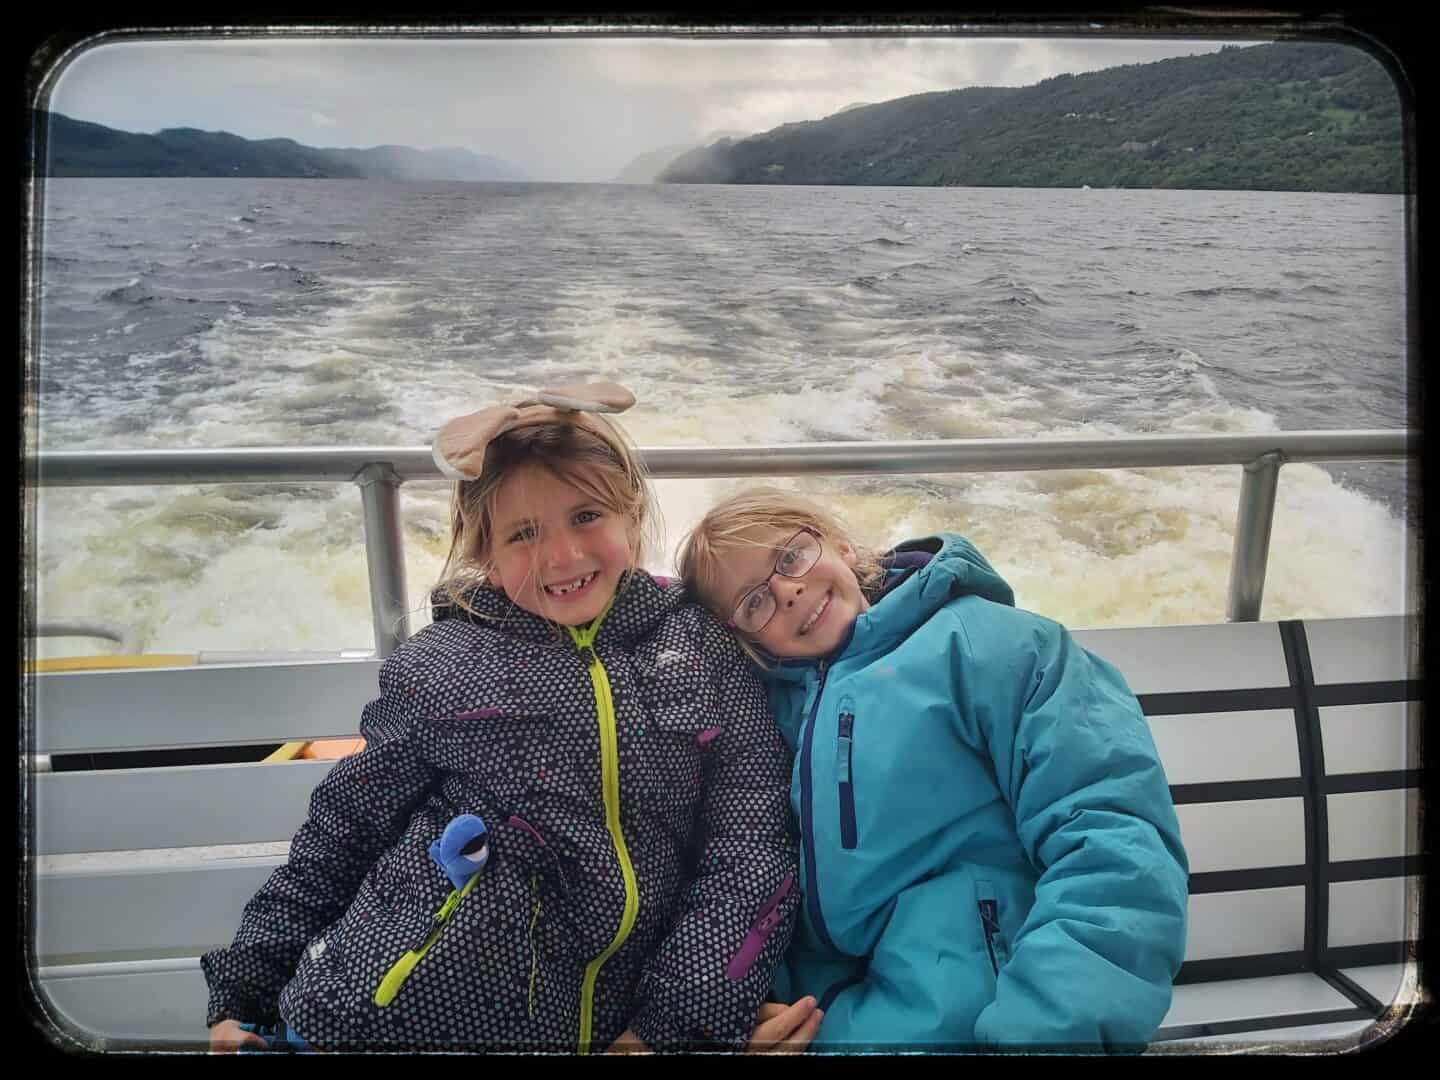 Two girls sitting on a bench on a boat in Loch Ness with water and mountains in background